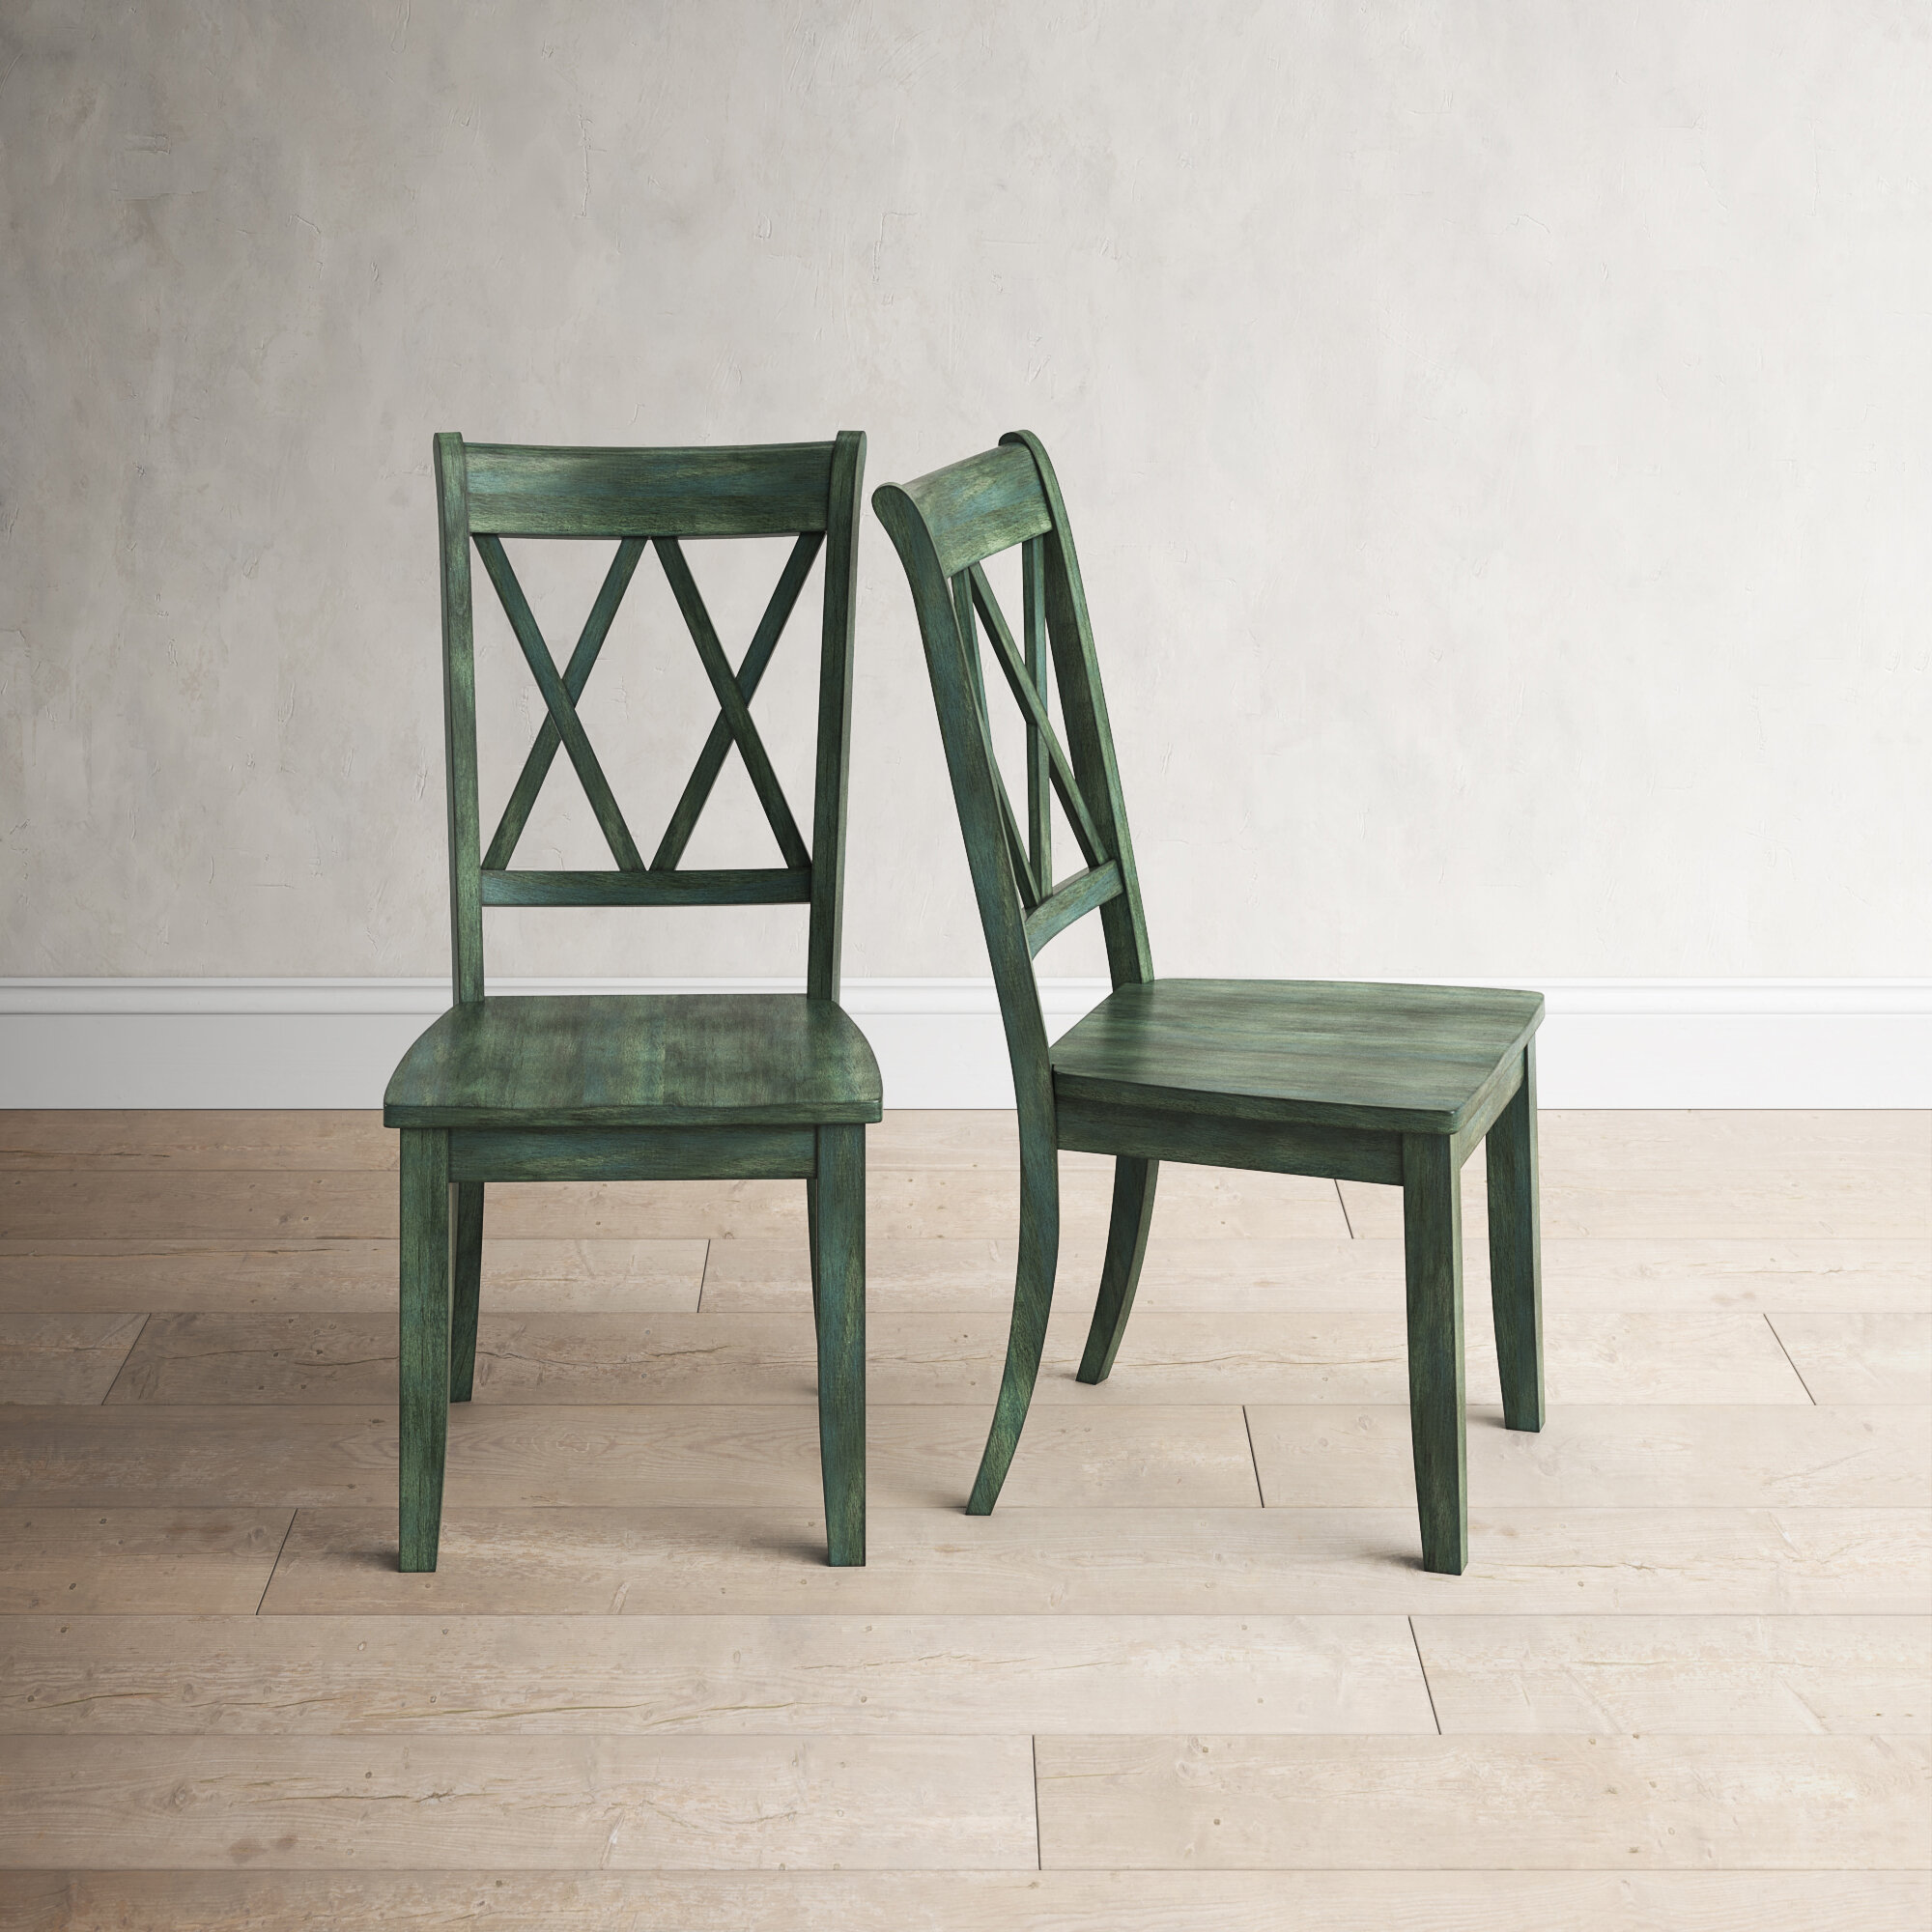 Natural Ash Wood Cross-Back Commercial Chair